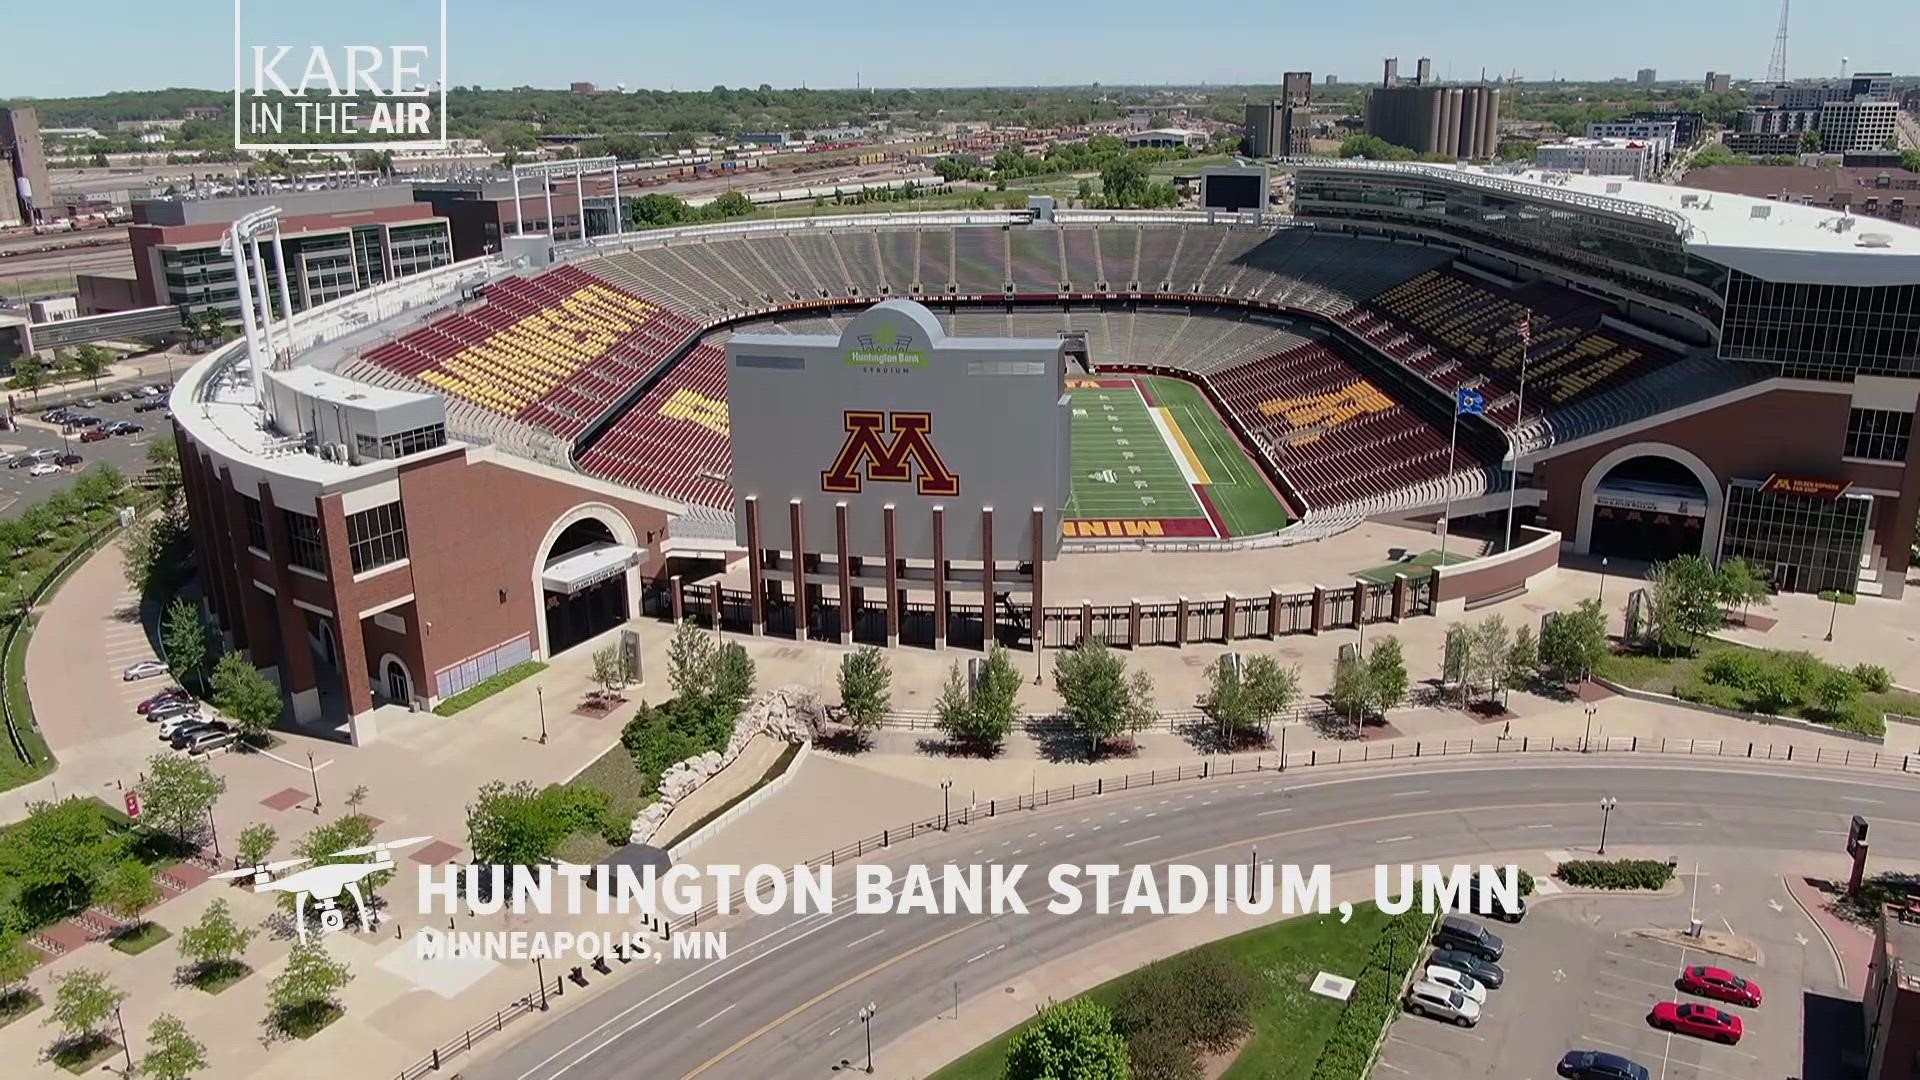 In honor of the 2022 Minnesota Gopher Football opener, we launched our drone over the place that gives Goldy and crew the home field advantage.